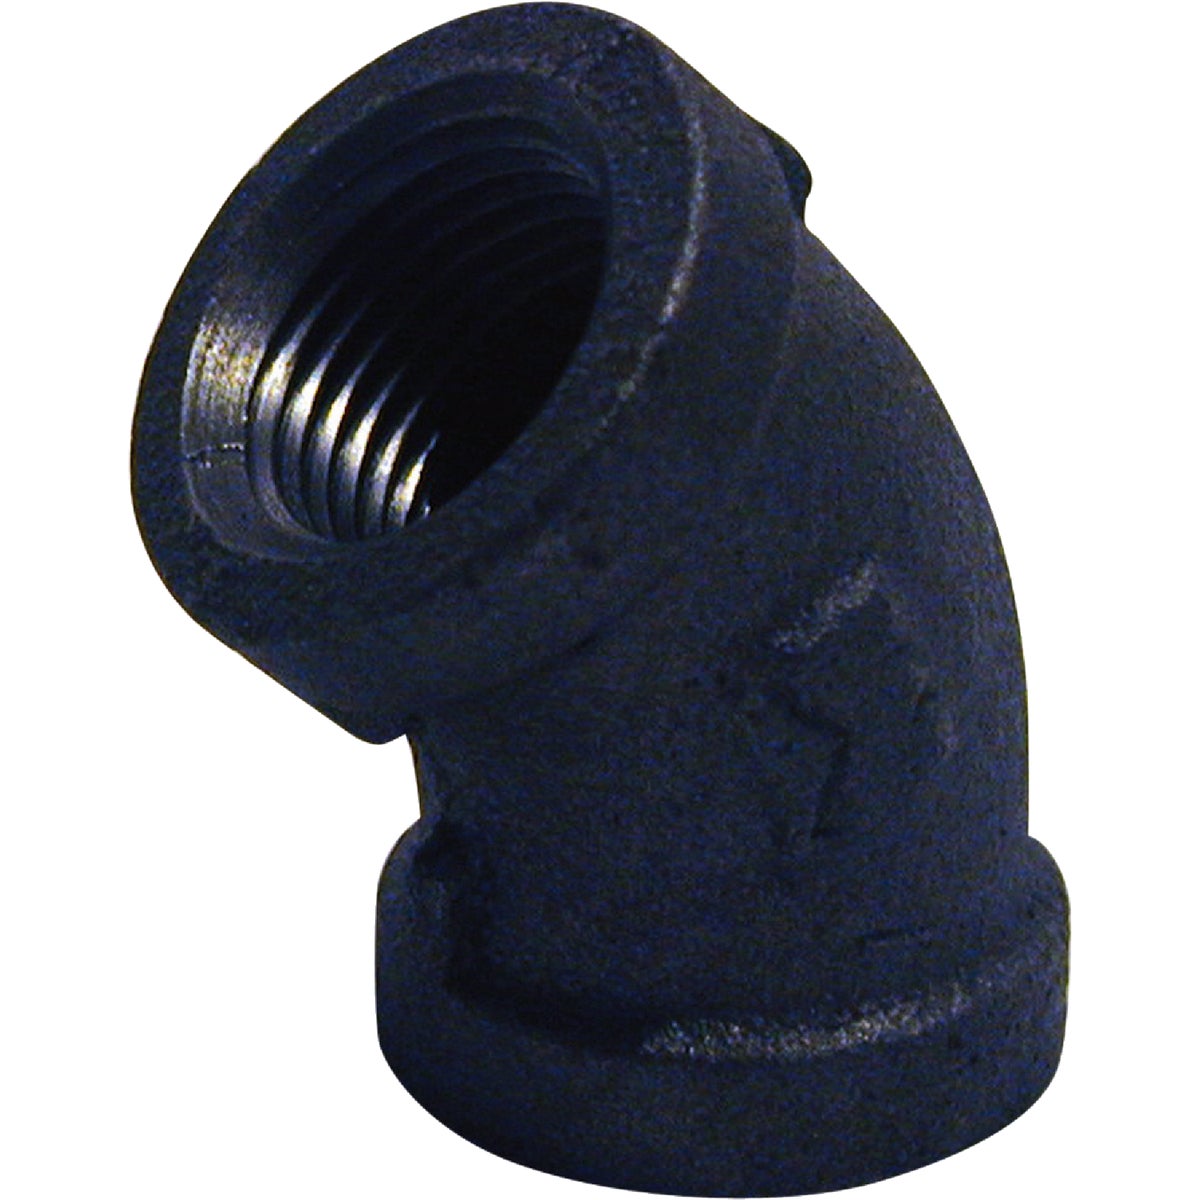 Southland 1-1/4 In. 45 Deg. Malleable Black Iron Elbow (1/8 Bend)